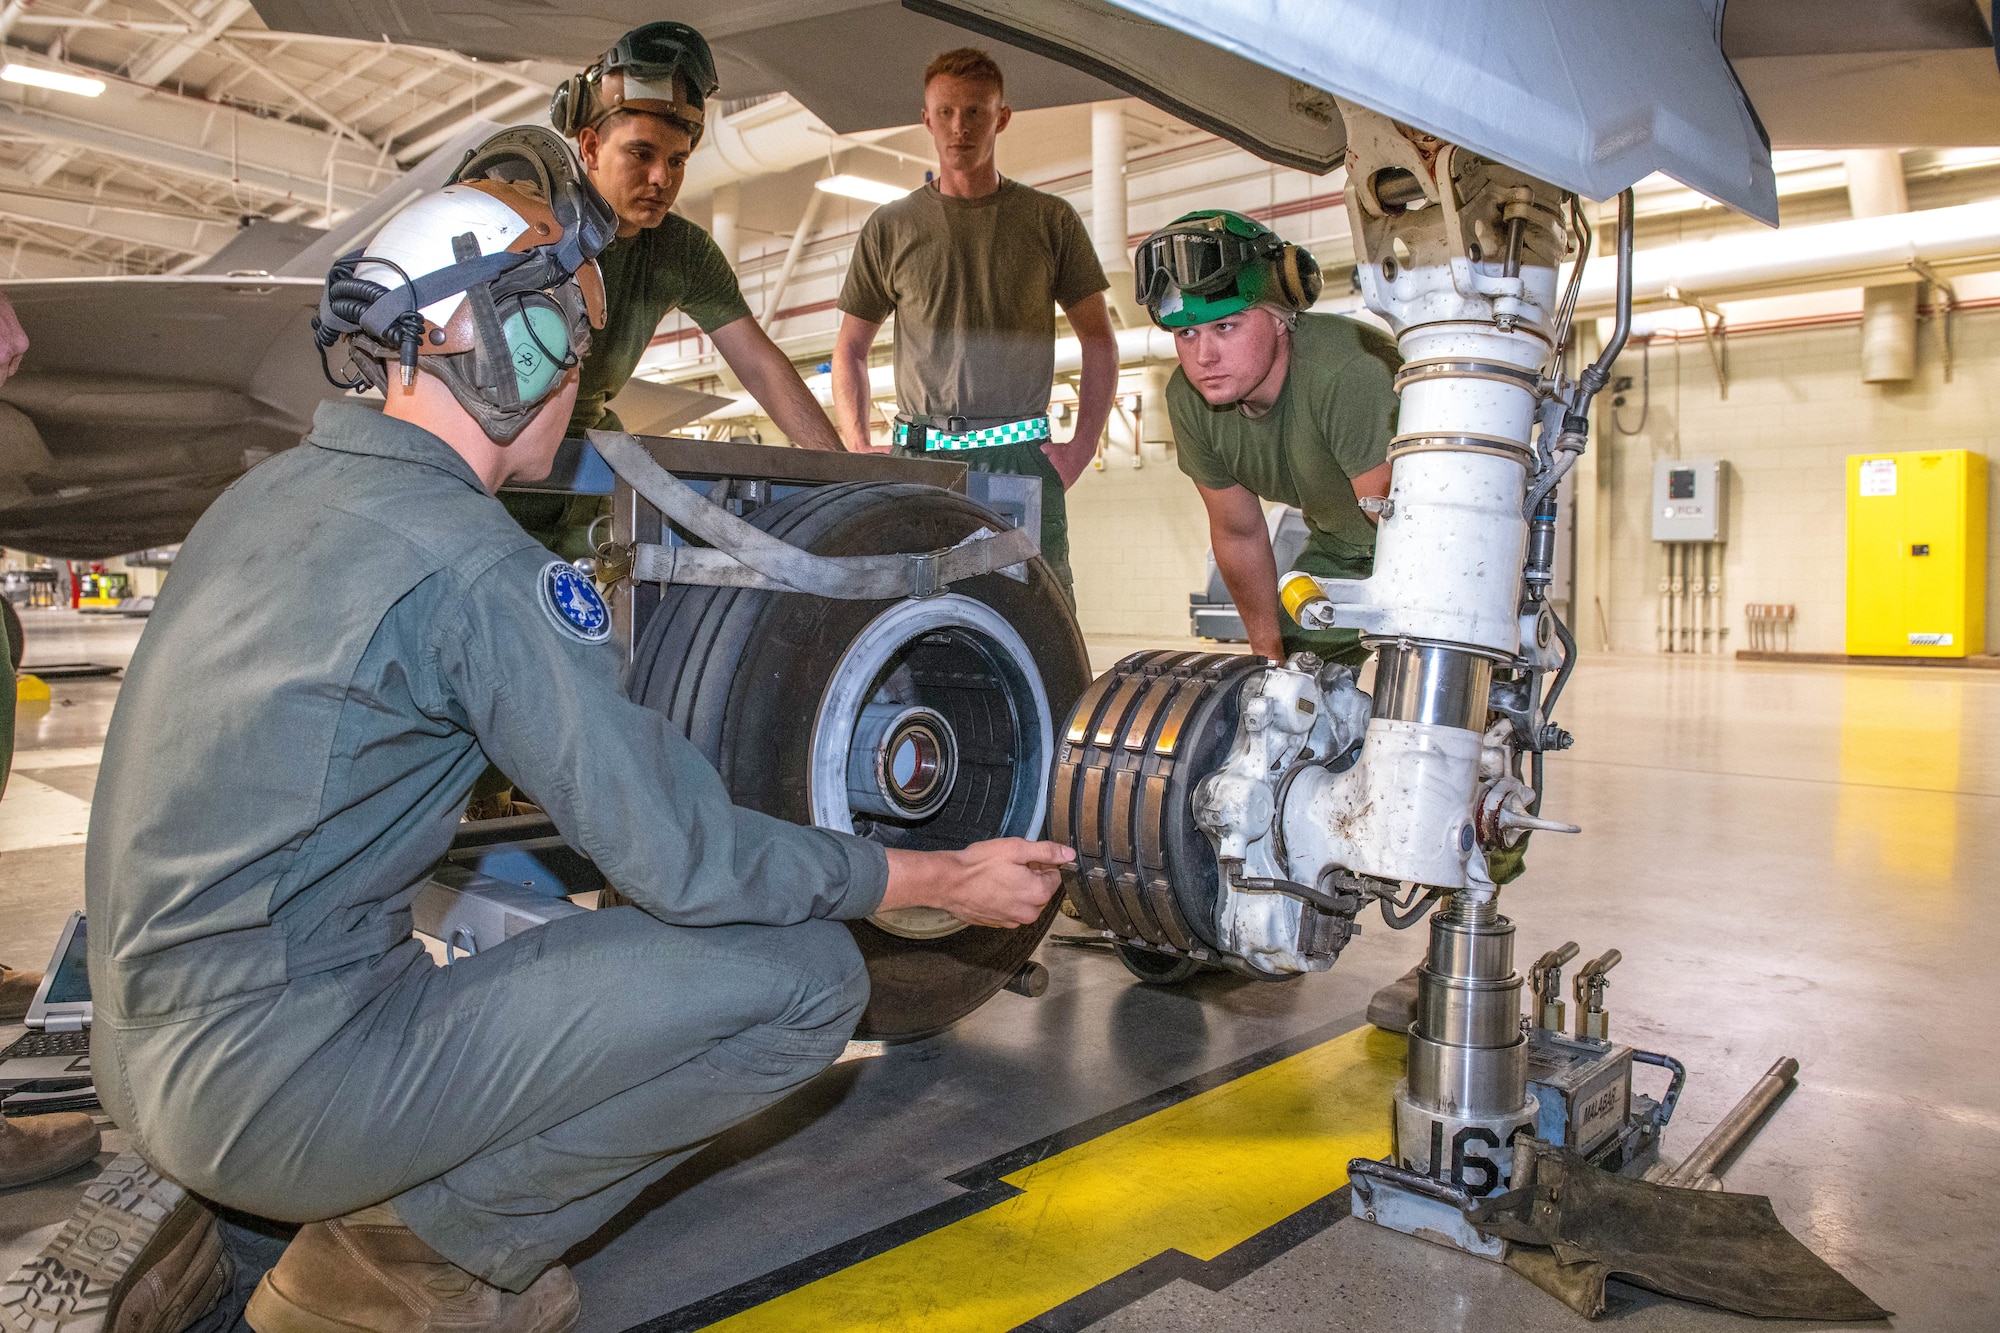 U.S. Marine Corps service members learn procedures for changing tires and inspecting brakes on the F-35A Lightning II aircraft May 9, 2022, at Luke Air Force Base, Arizona.